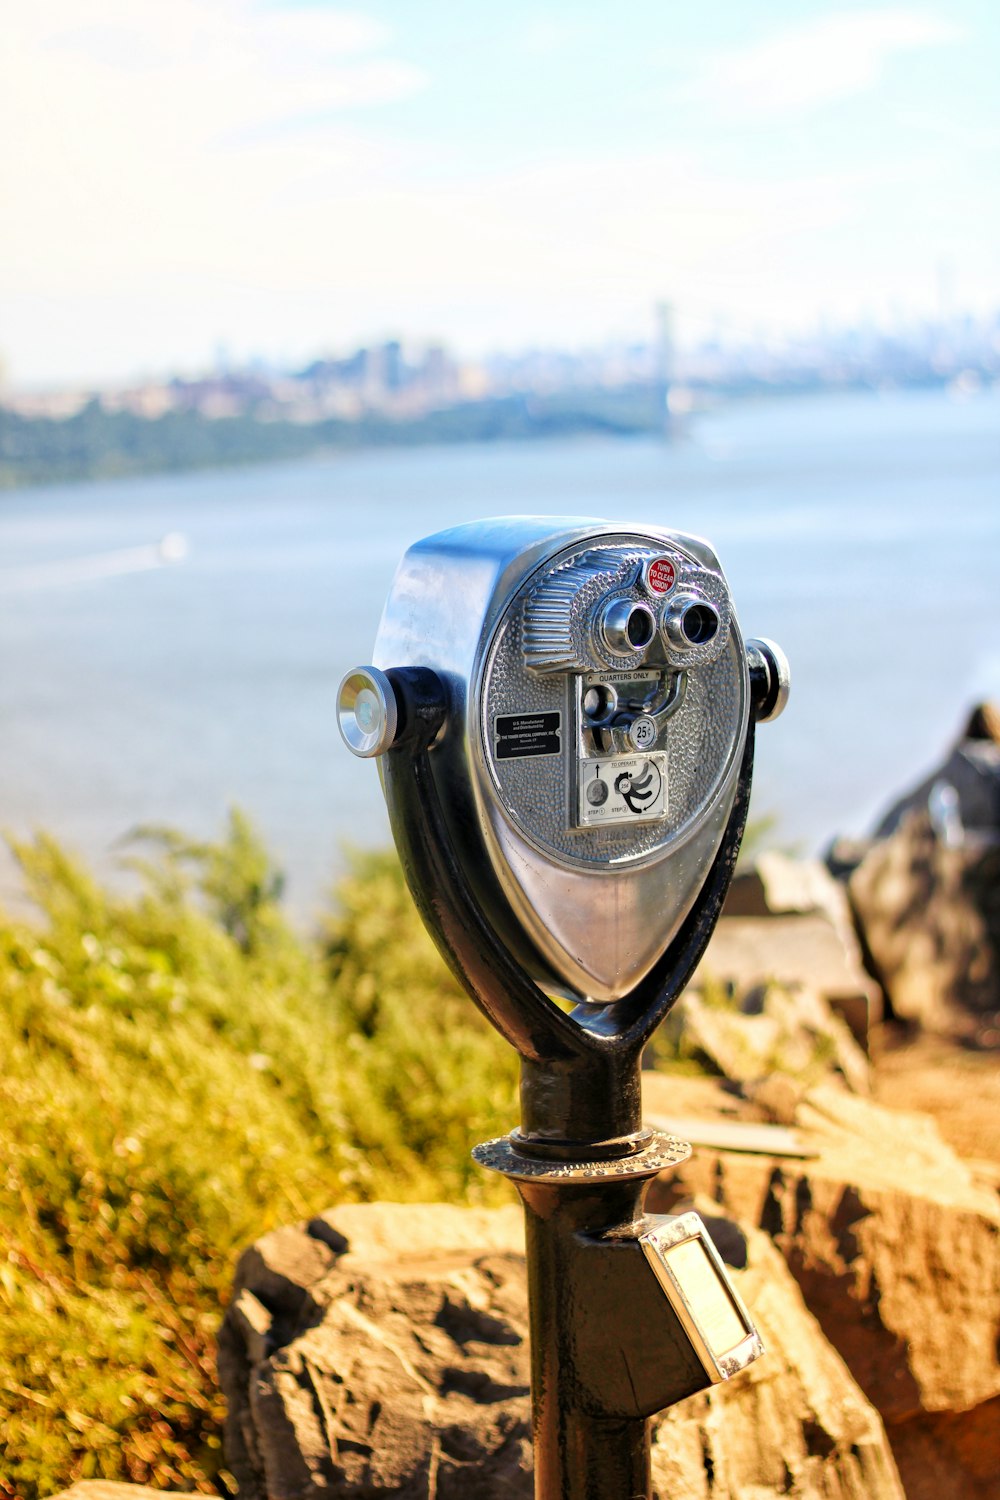 a coin operated parking meter overlooking a body of water